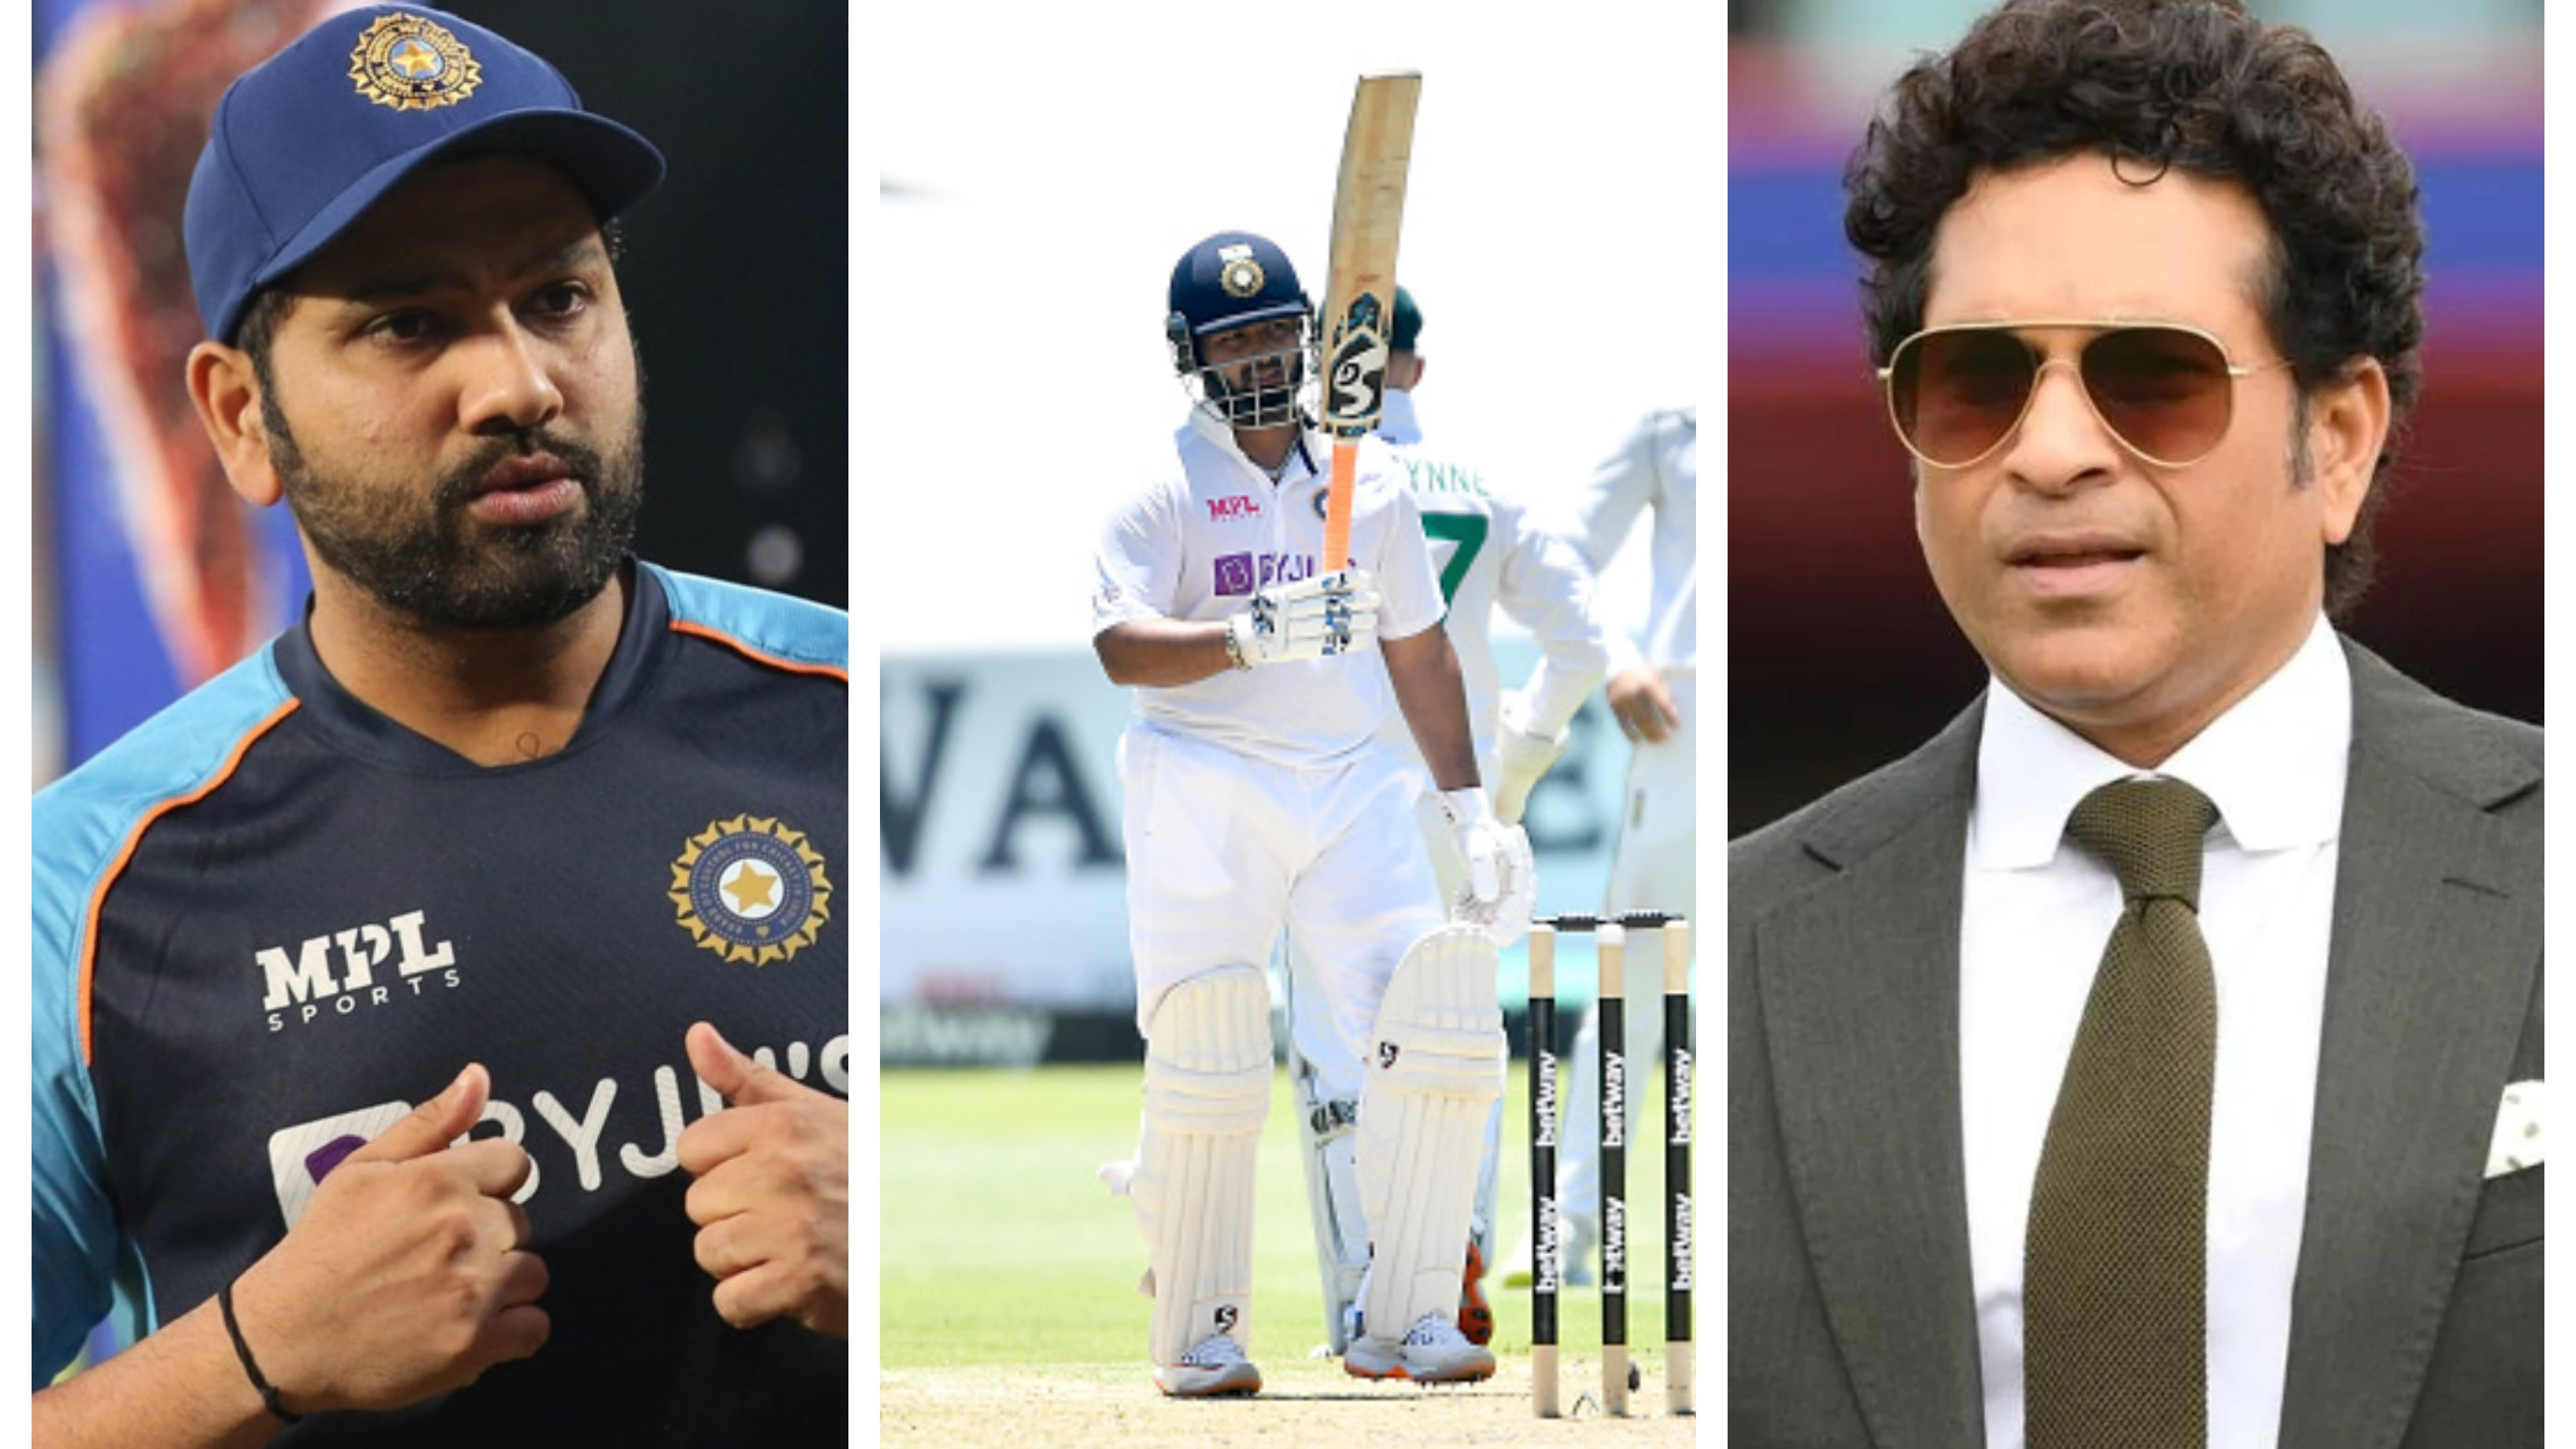 SA v IND 2021-22: Cricket fraternity reacts as Rishabh Pant slams a sparkling ton in India’s second innings total of 198